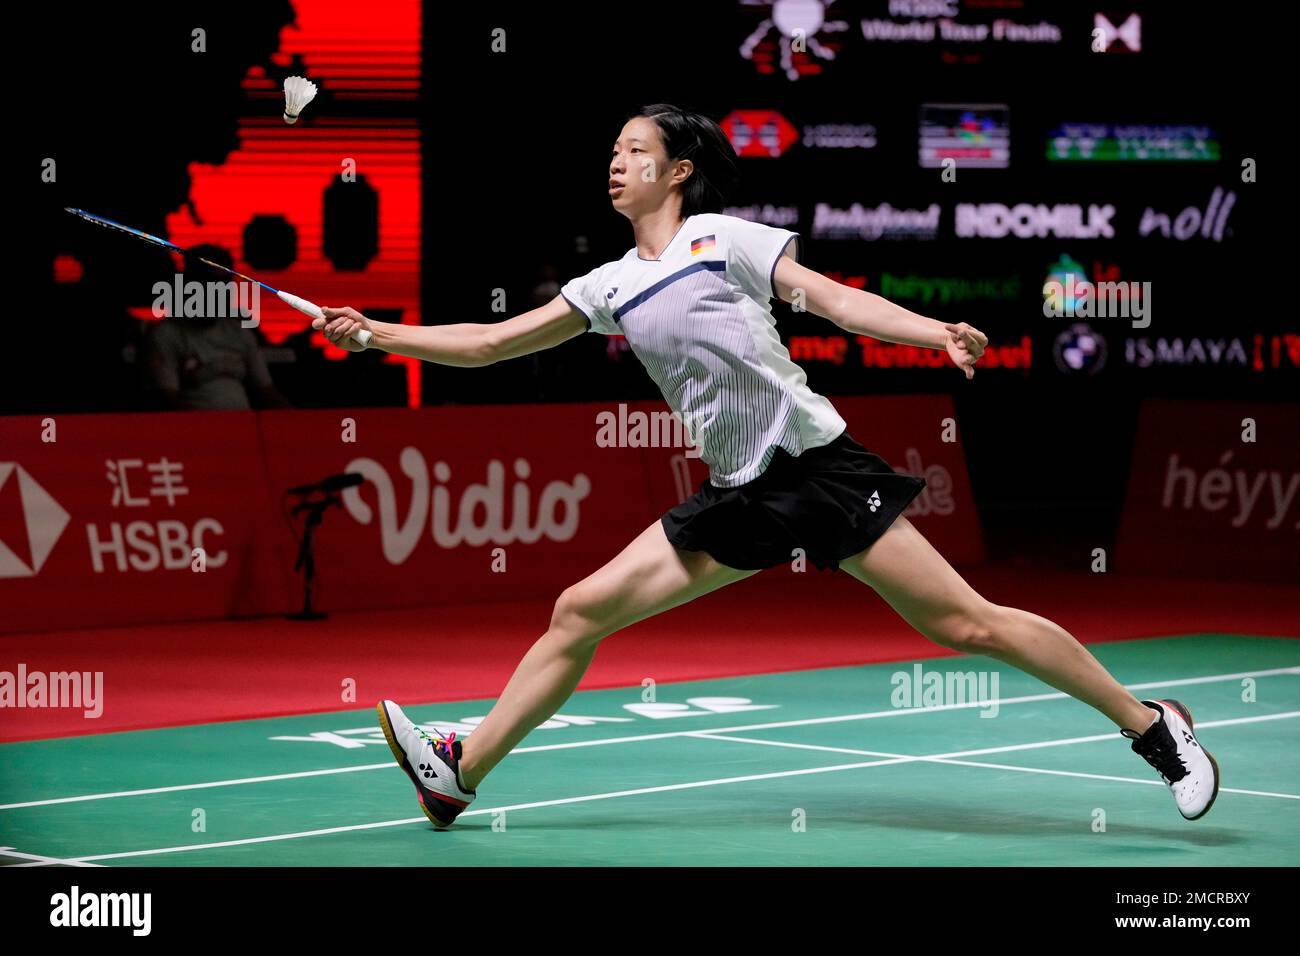 Germanys Yvonne Li competes against Denmarks Line Christophersen during their womens singles badminton group stage match at the BWF World Tour Finals in Nusa Dua, Bali, Indonesia, Friday, Dec